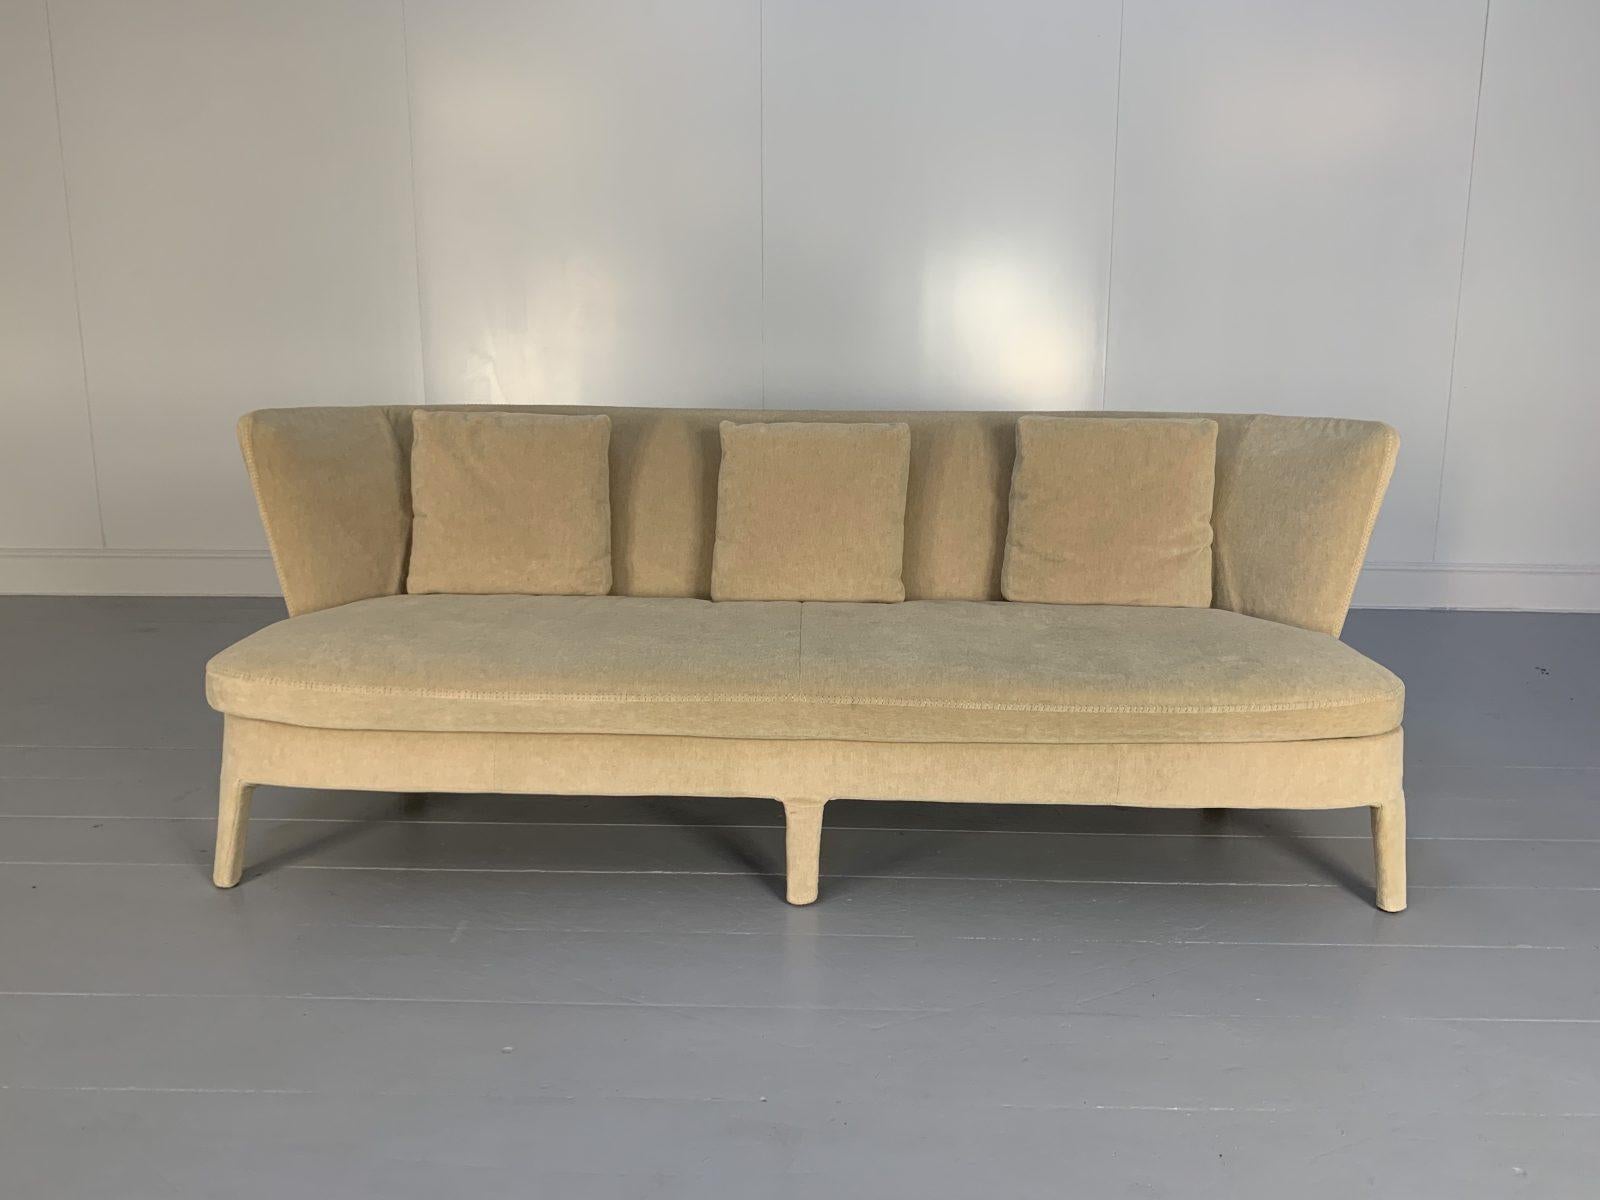 Hello Friends, and welcome to another unmissable offering from Lord Browns Furniture, the UK’s premier resource for fine Sofas and Chairs.
On offer on this occasion is a superb, rare B&B Italia Maxalto “Febo 2803BCT” 3-Seat Sofa dressed in an